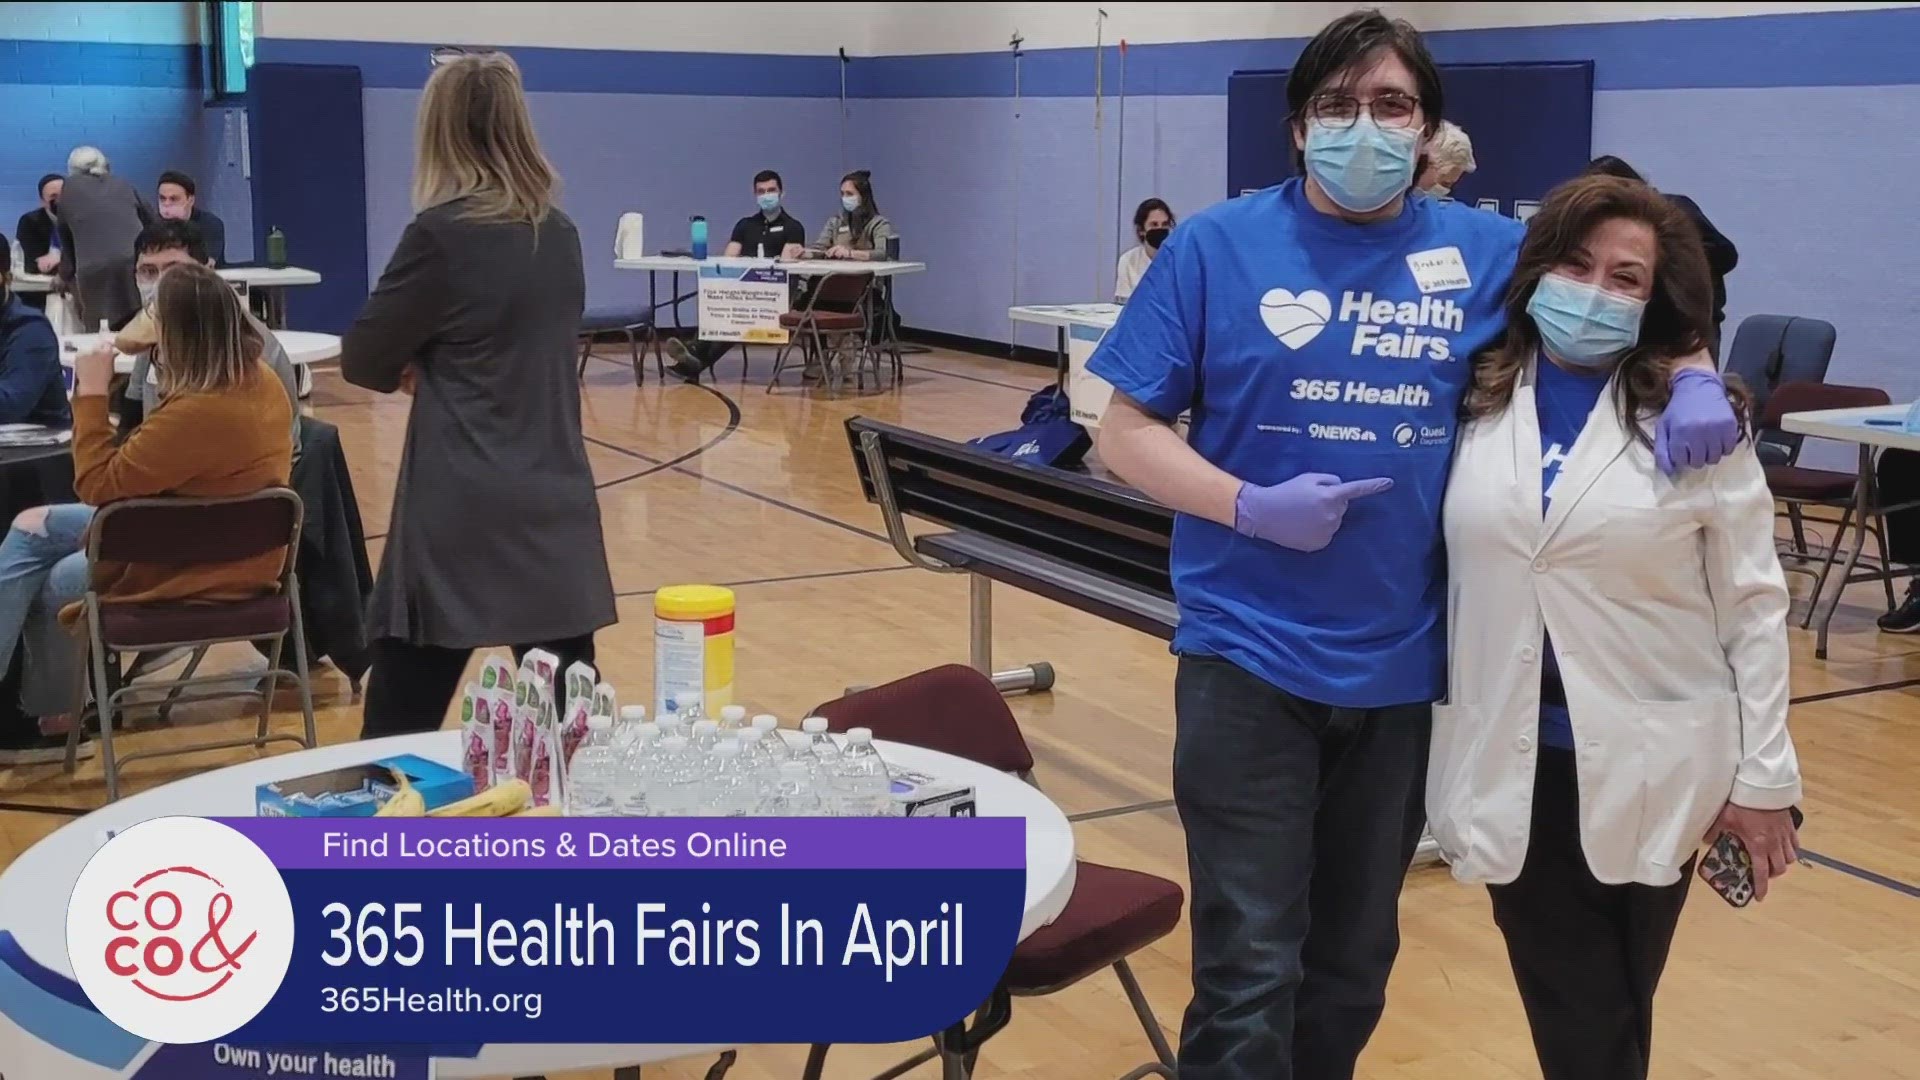 365 Health is hosting over 40 health fairs throughout Colorado this spring. The goal is to get vital health care resources to under-served communities.